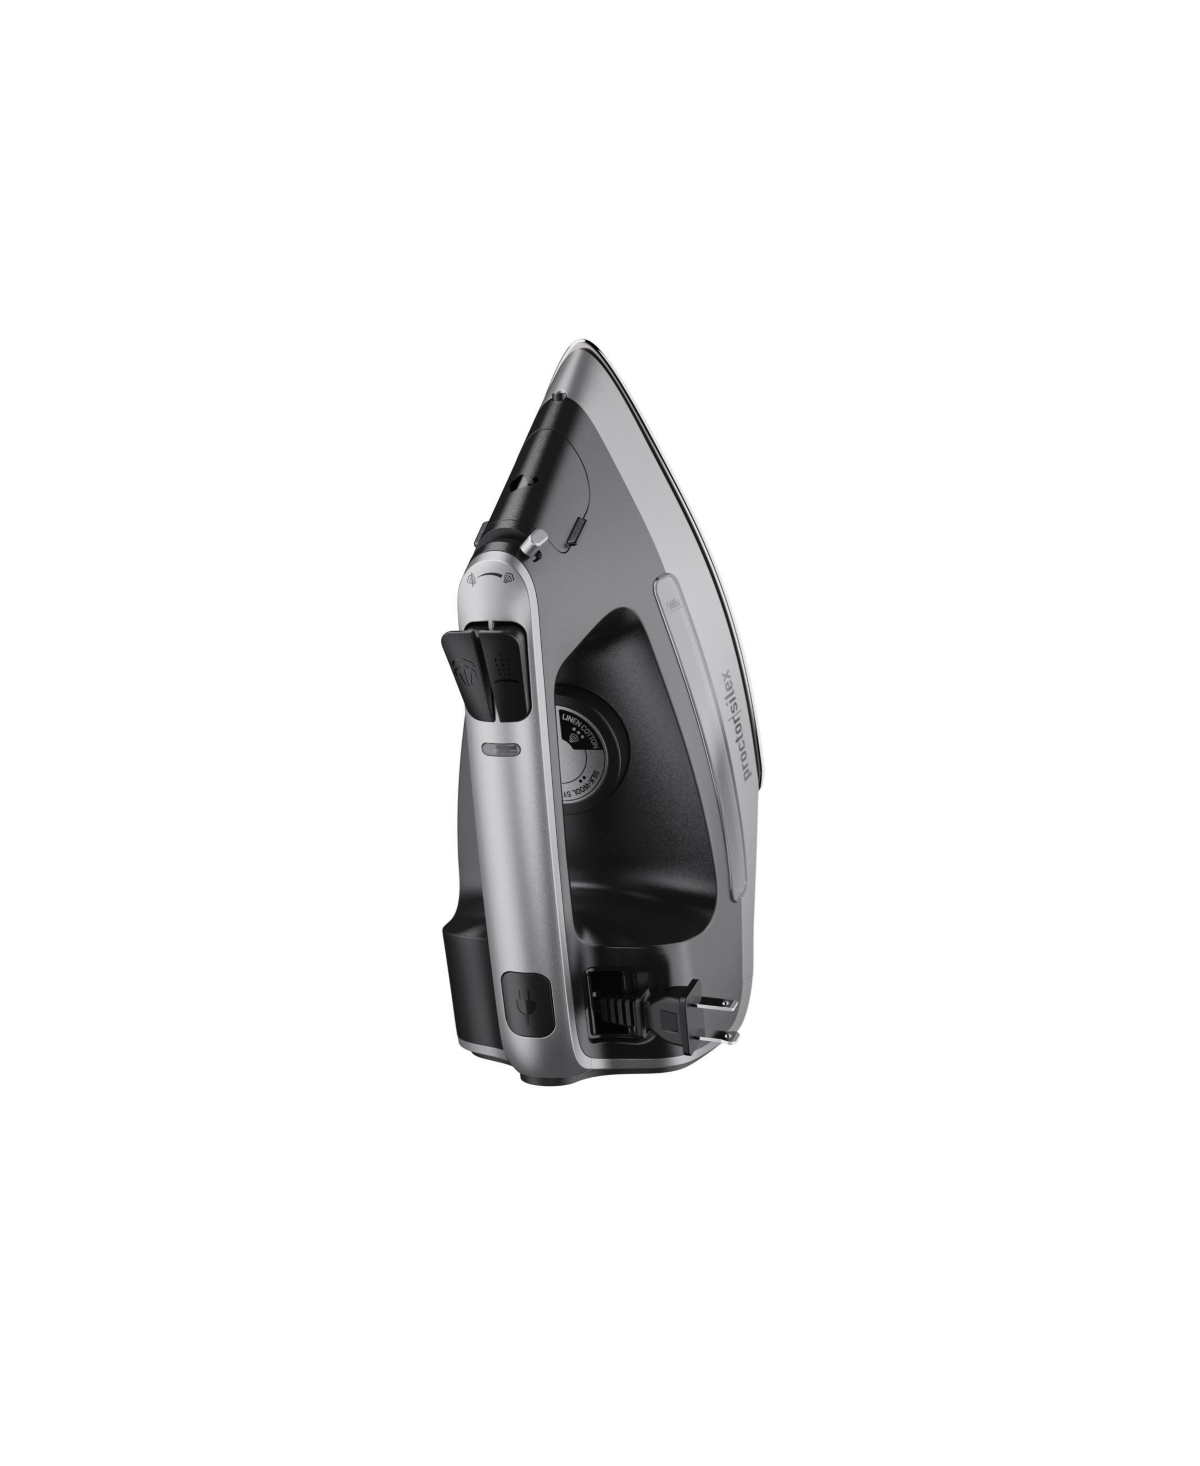 Proctor Silex Steam Iron With Retractable Cord In Black